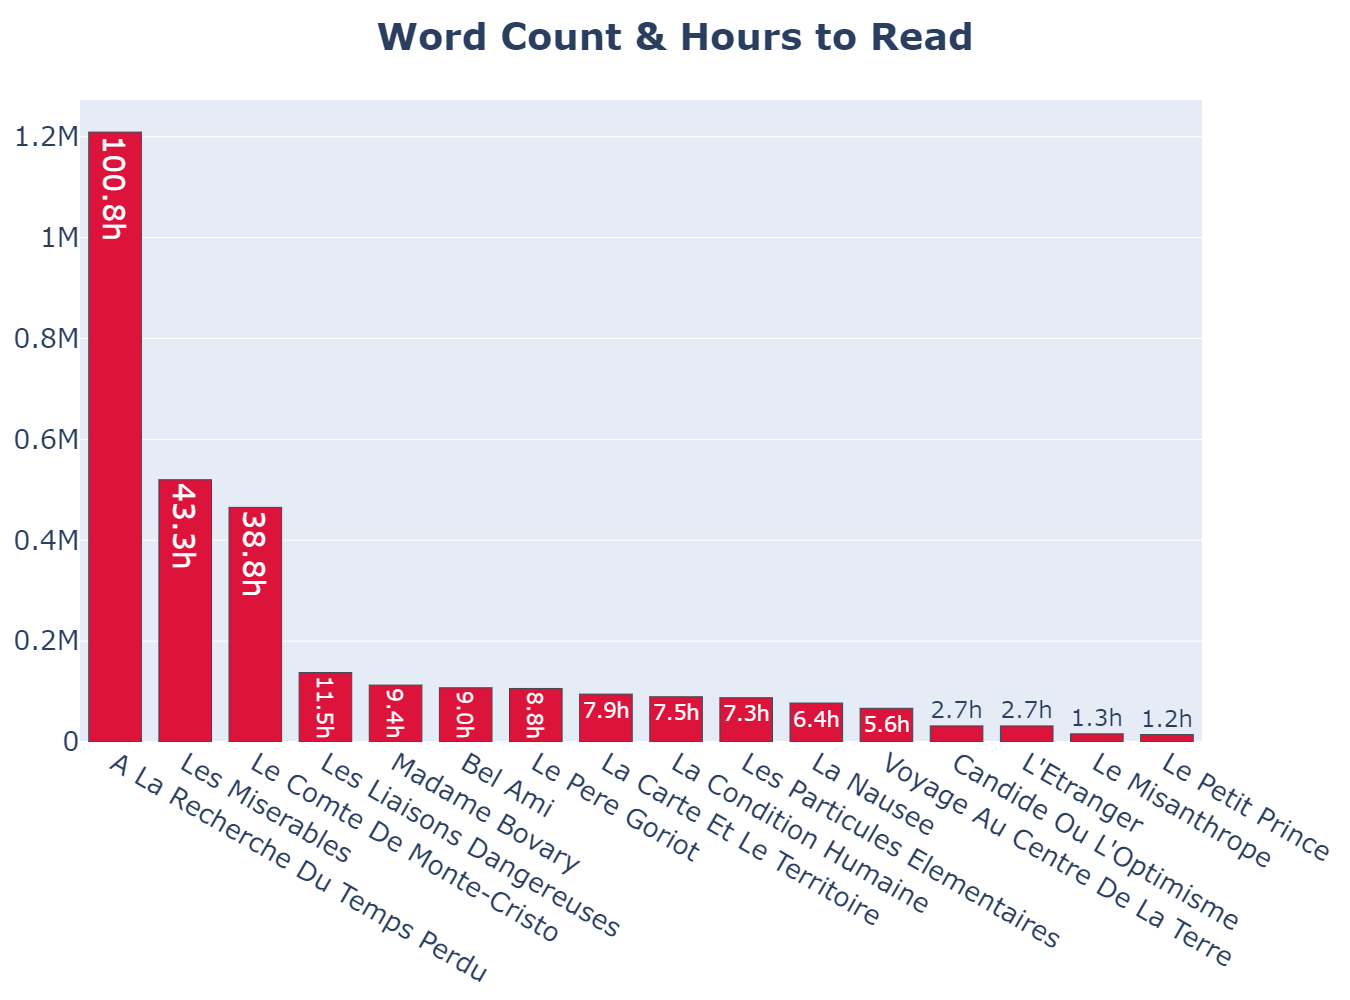 Word Count & Hours to Read